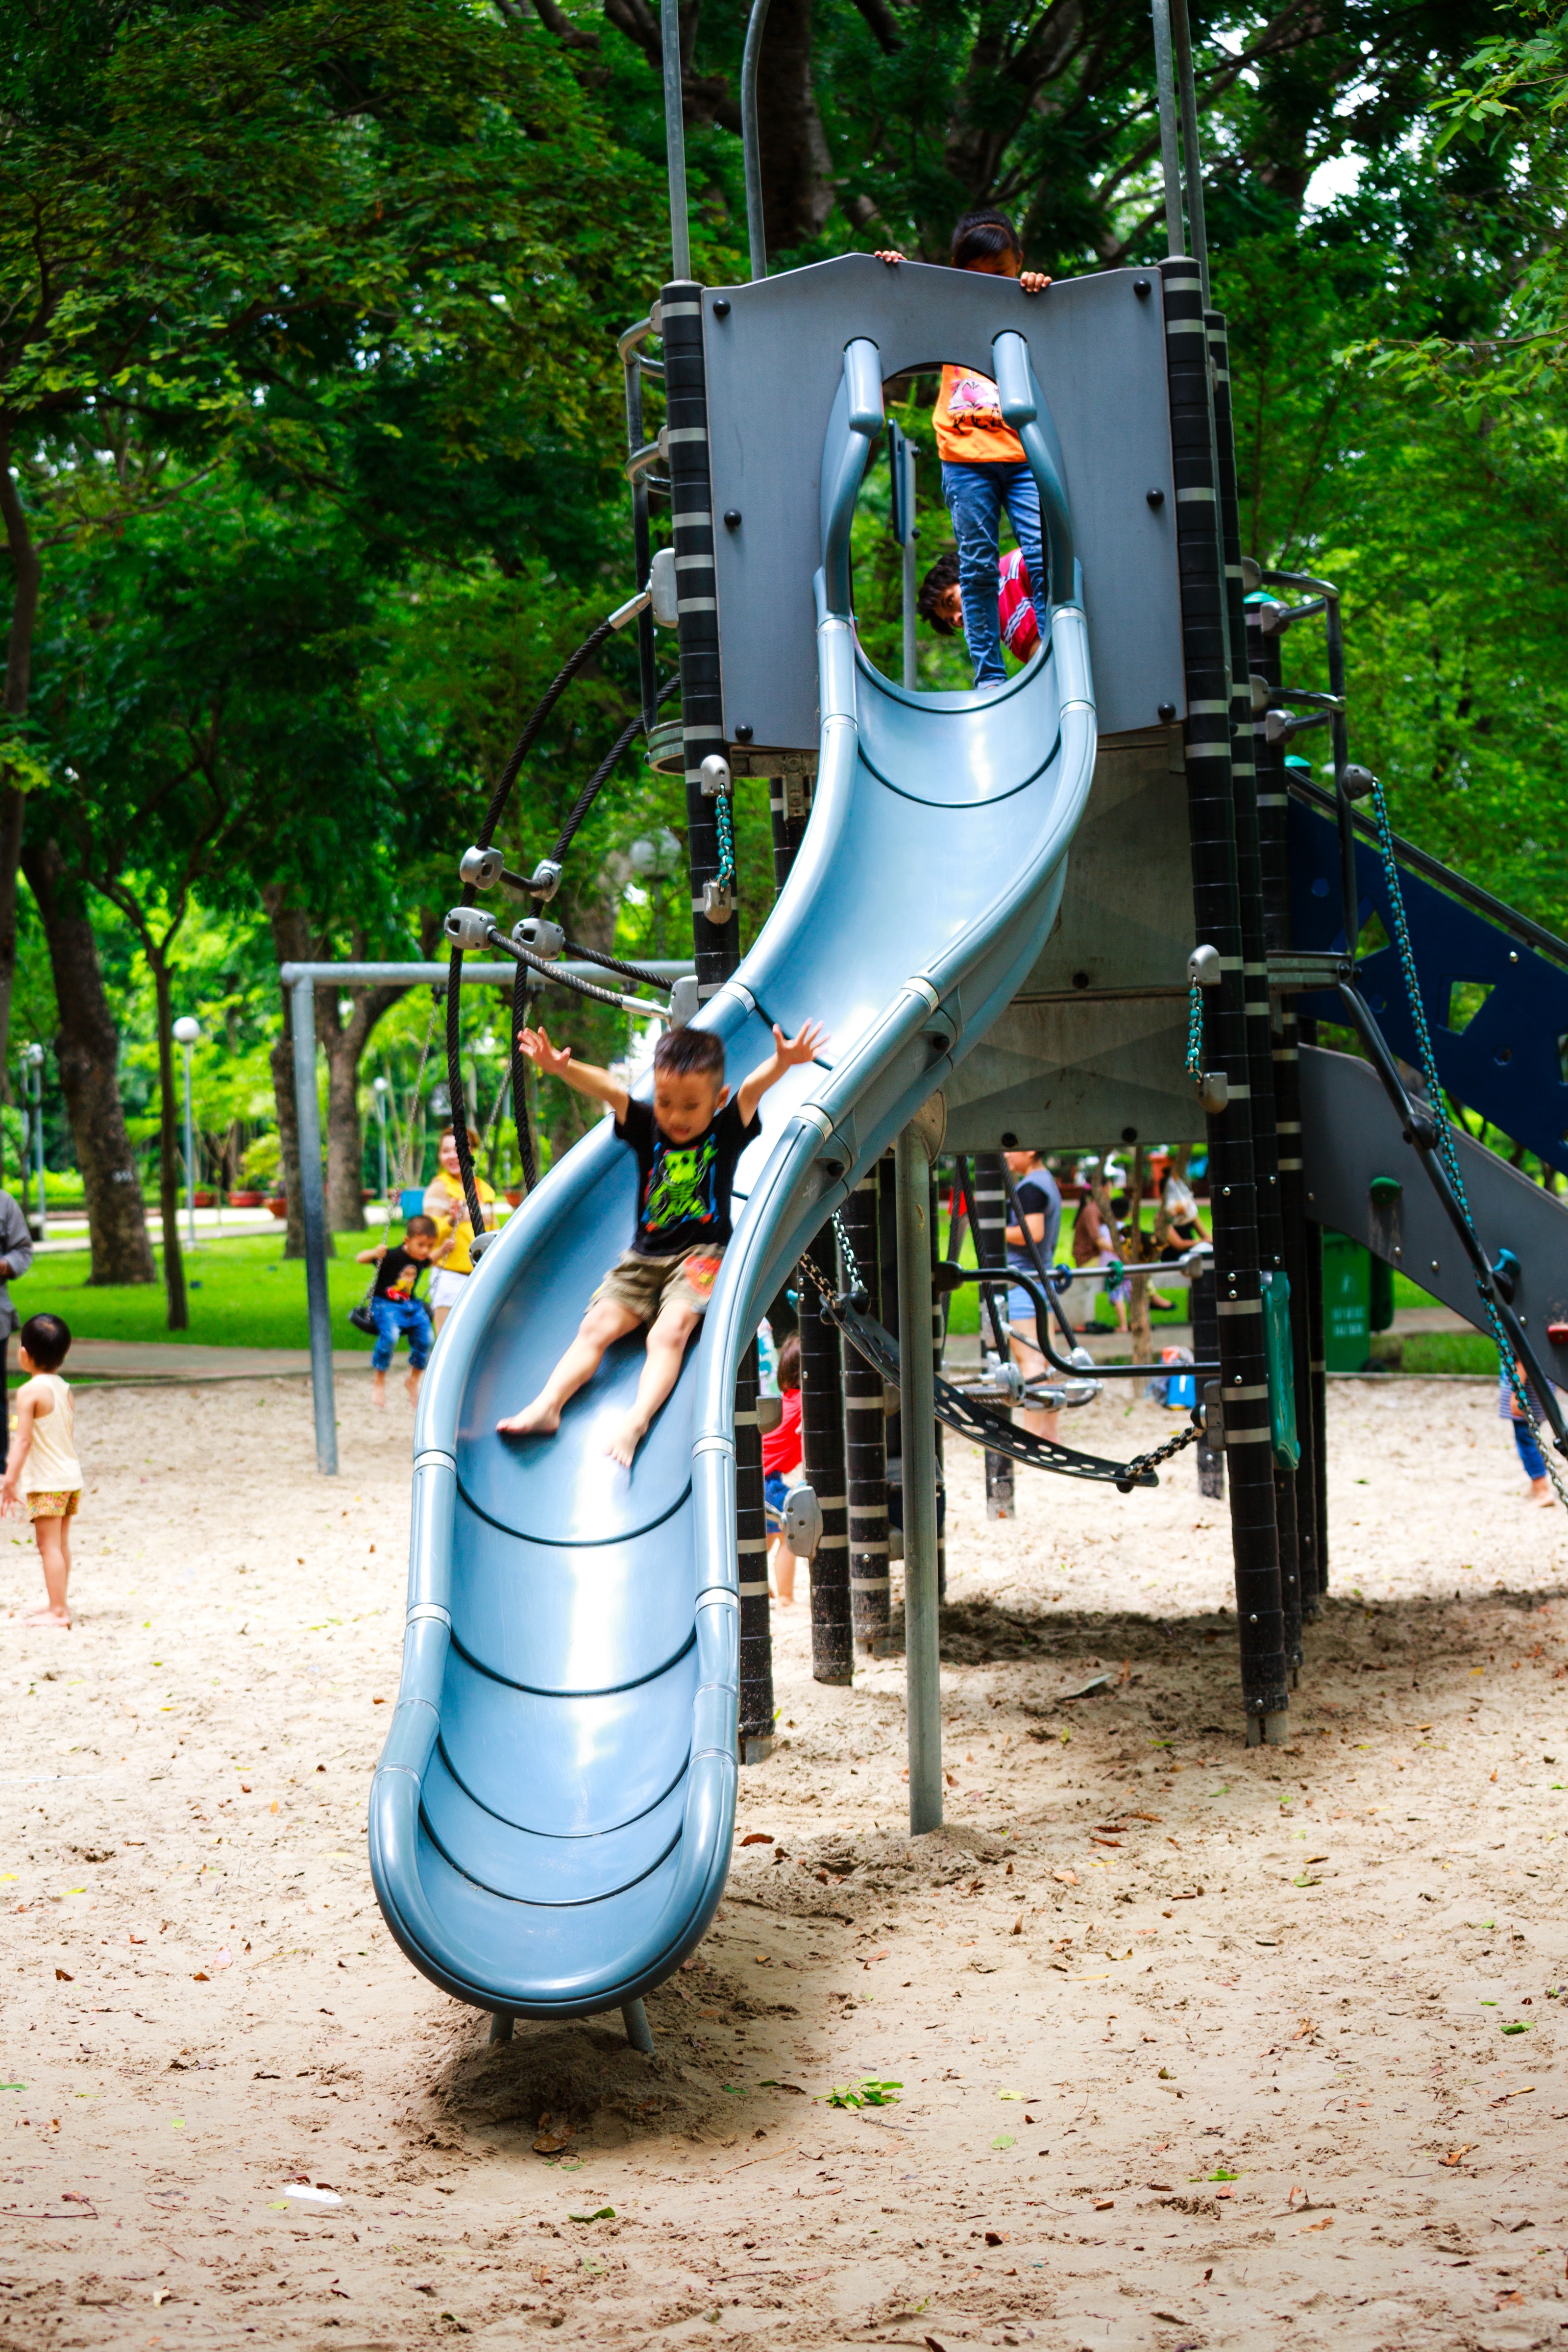 boy-playing-on-slide-in-playground-2143761